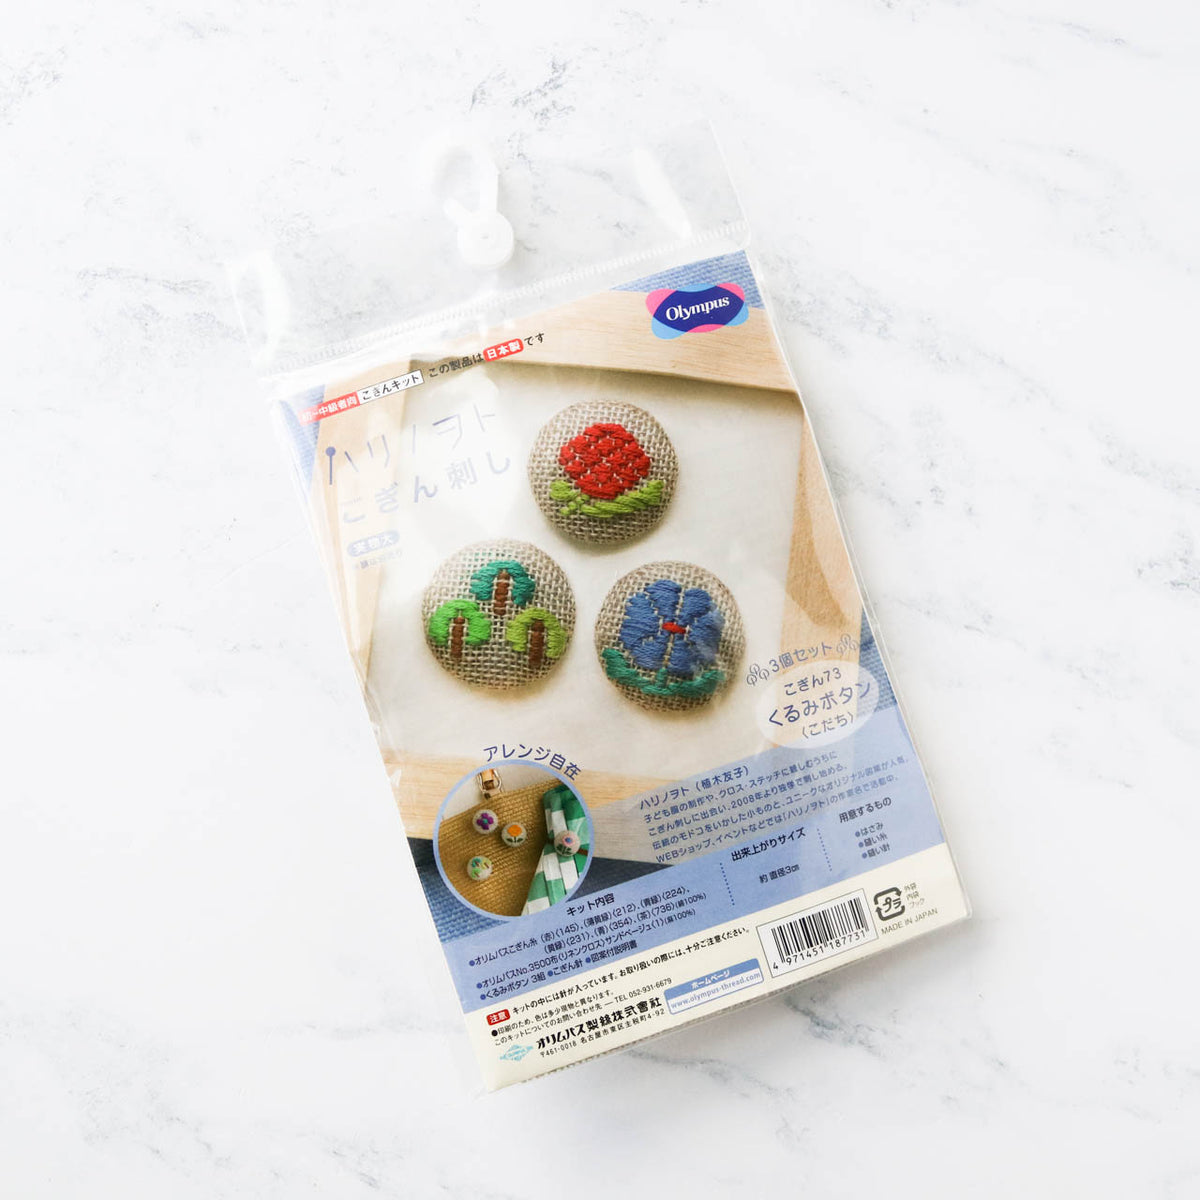 Kogin Embroidery Covered Button Kit - Floral Set 2